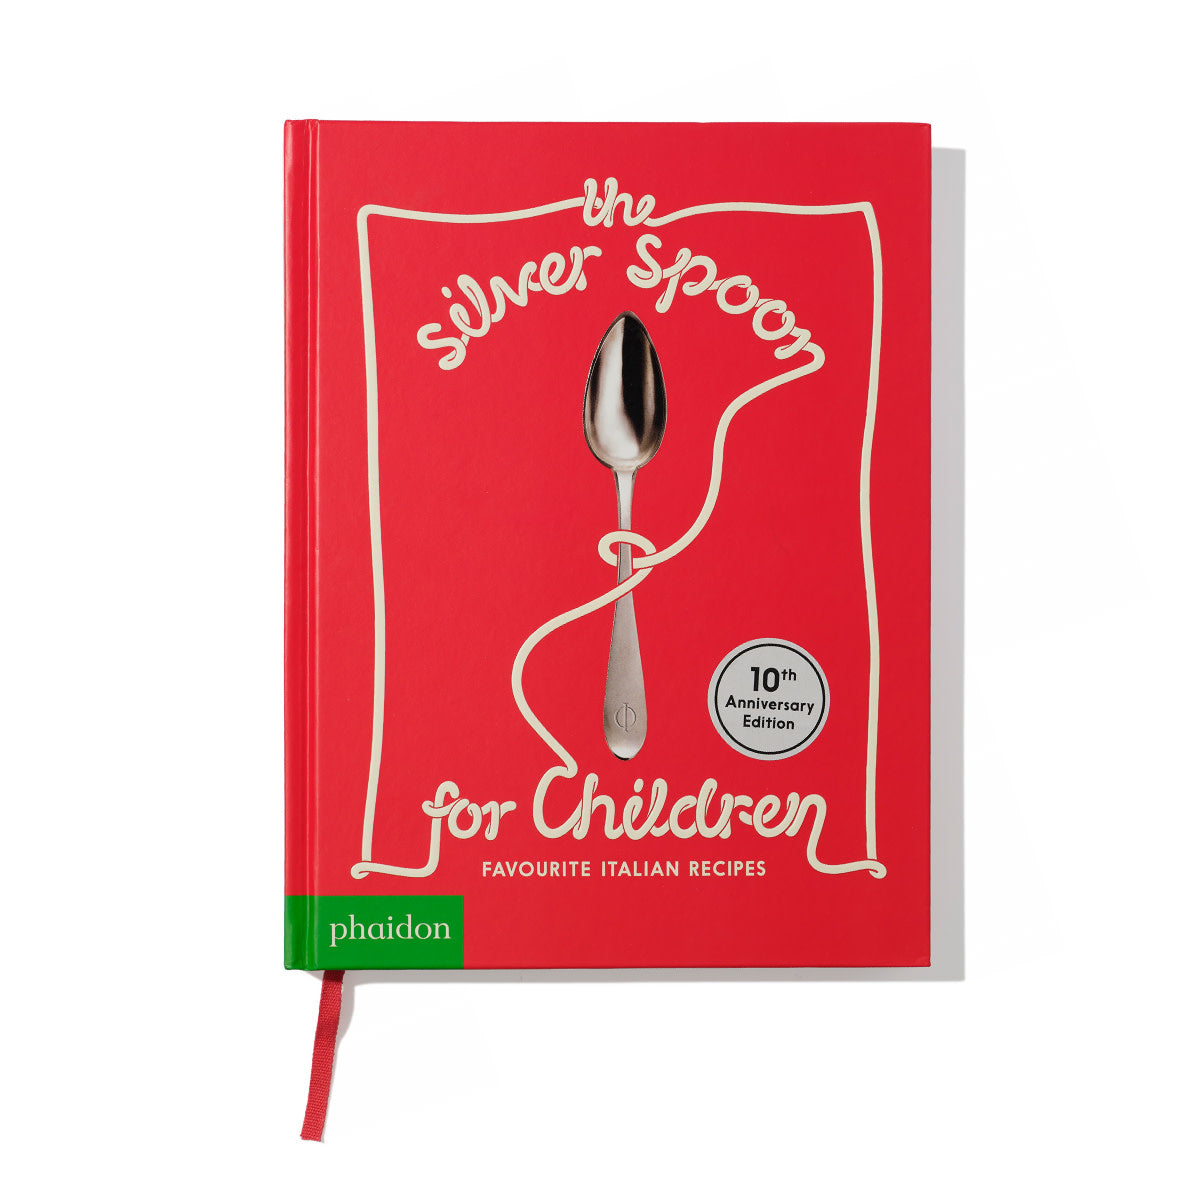 The Silver Spoon - Children's Cook Book